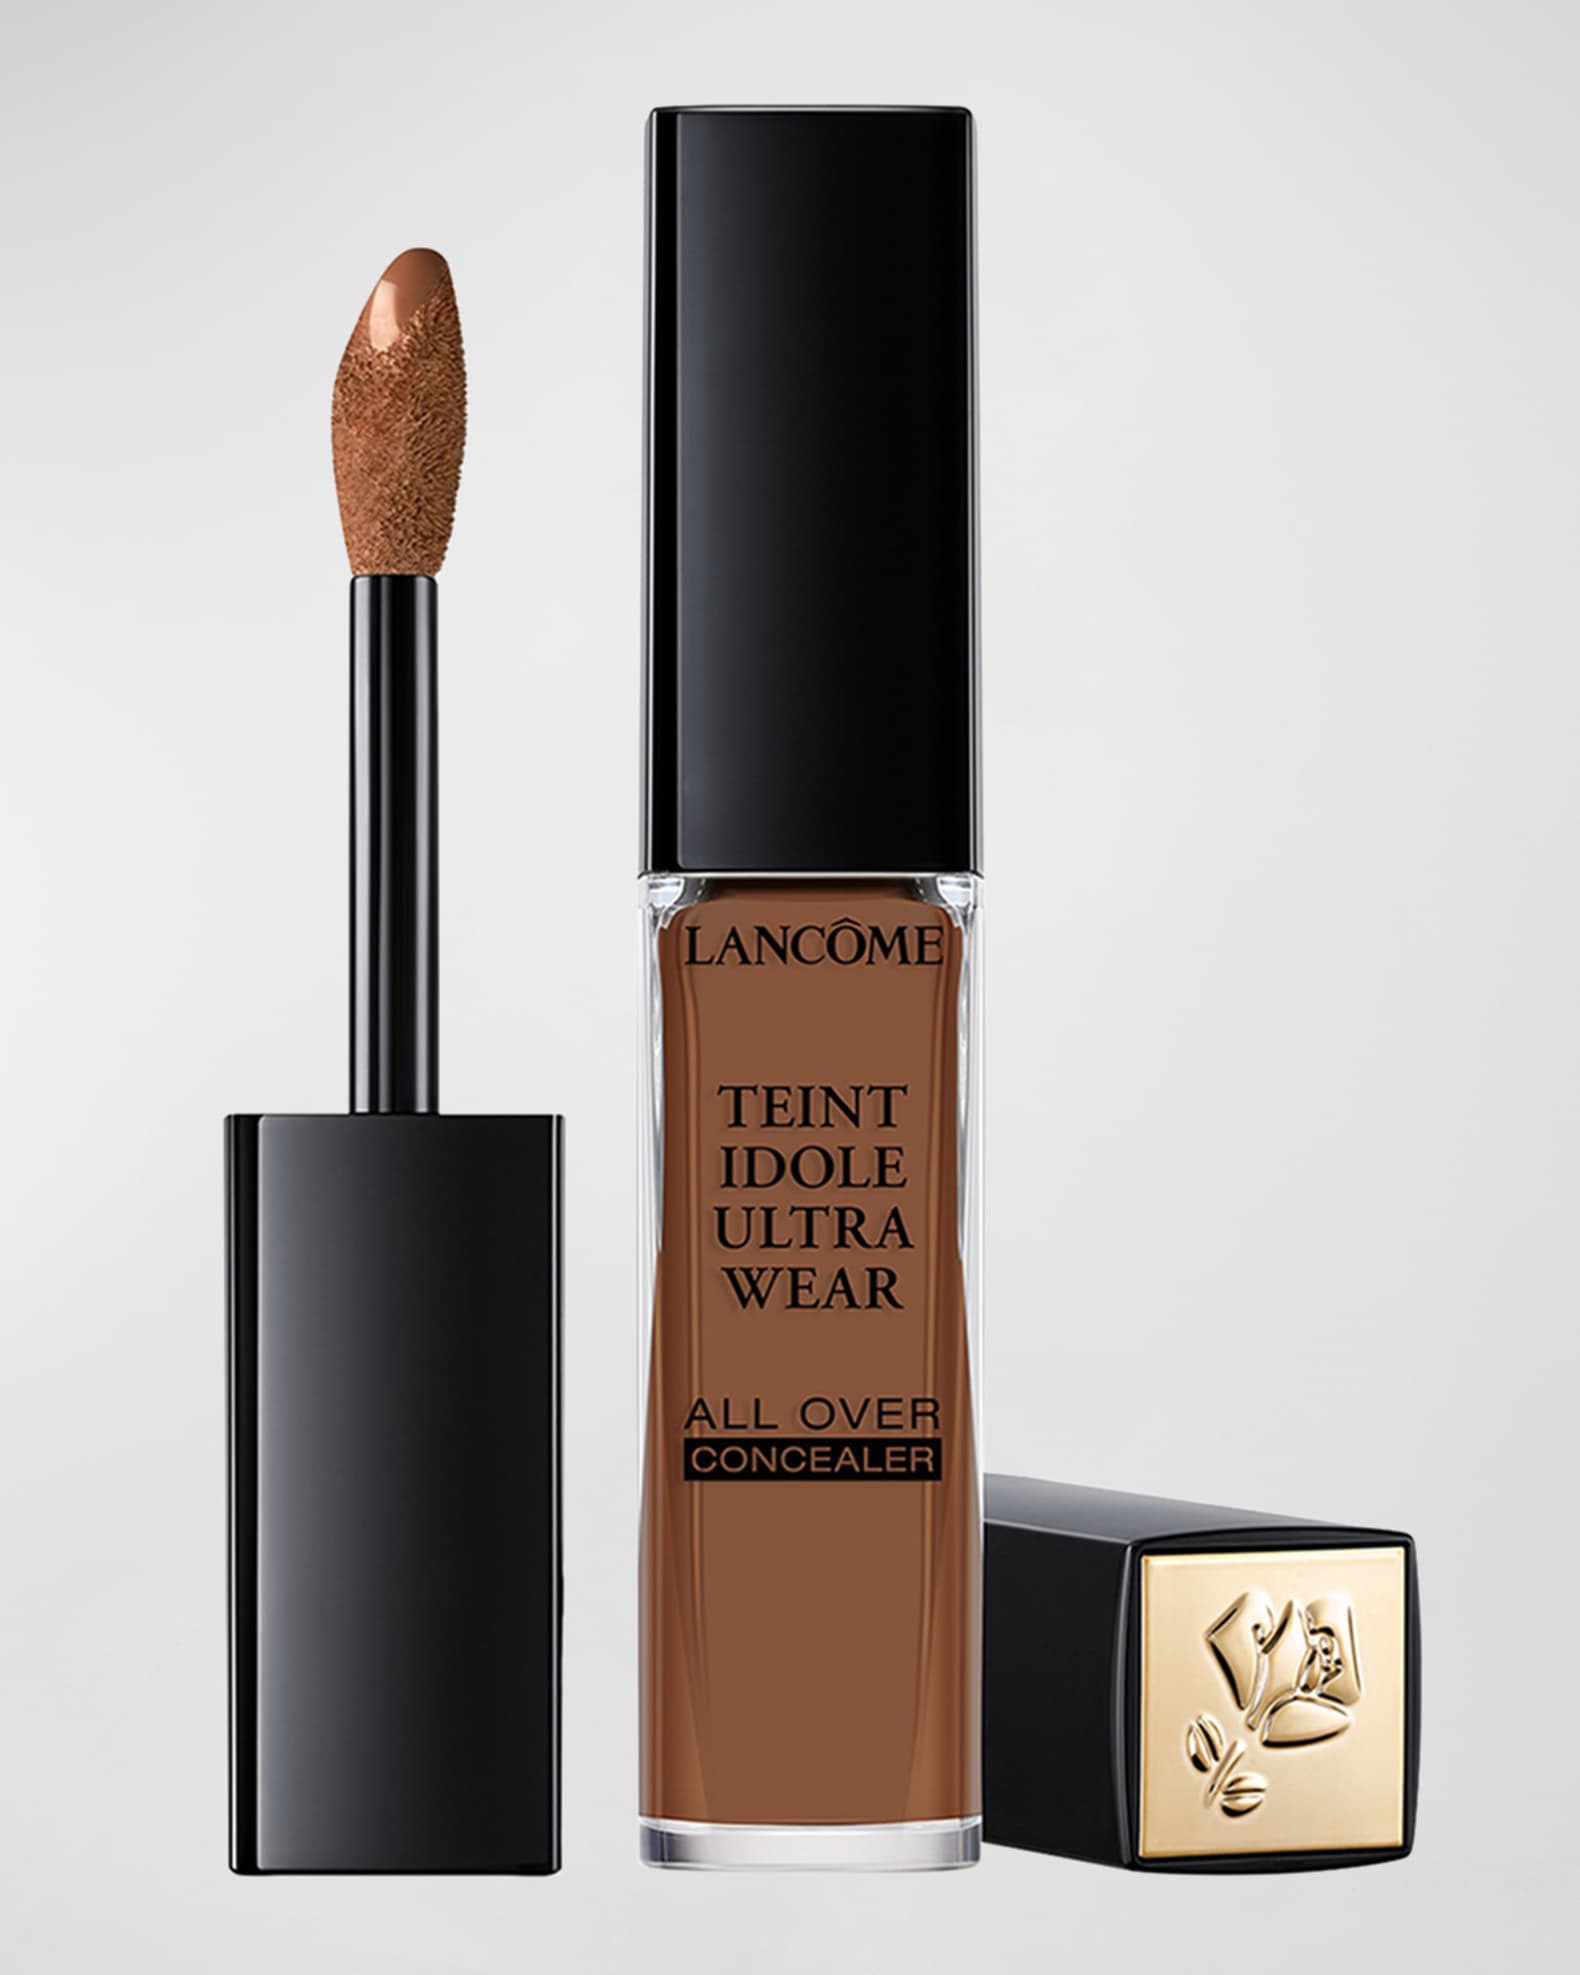 Lancome Teint Idole Ultra Wear All-Over Concealer